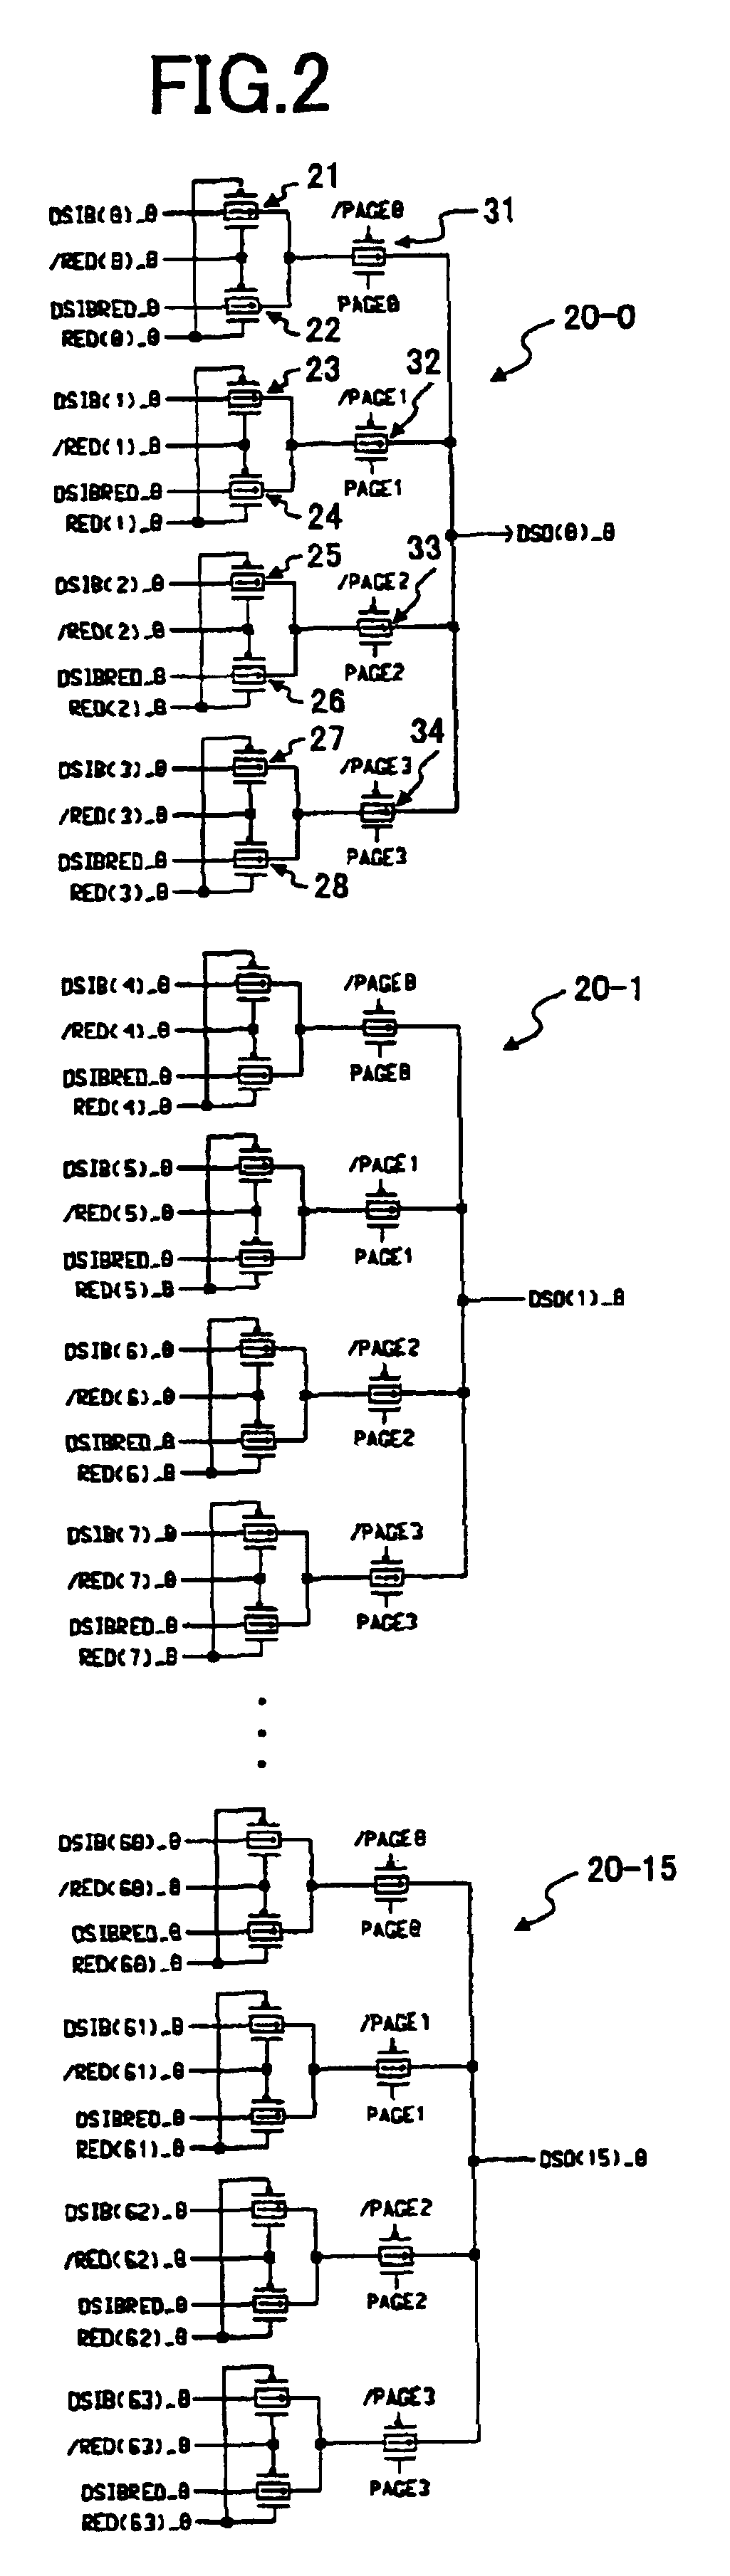 Semiconductor memory device with memory cell array divided into blocks